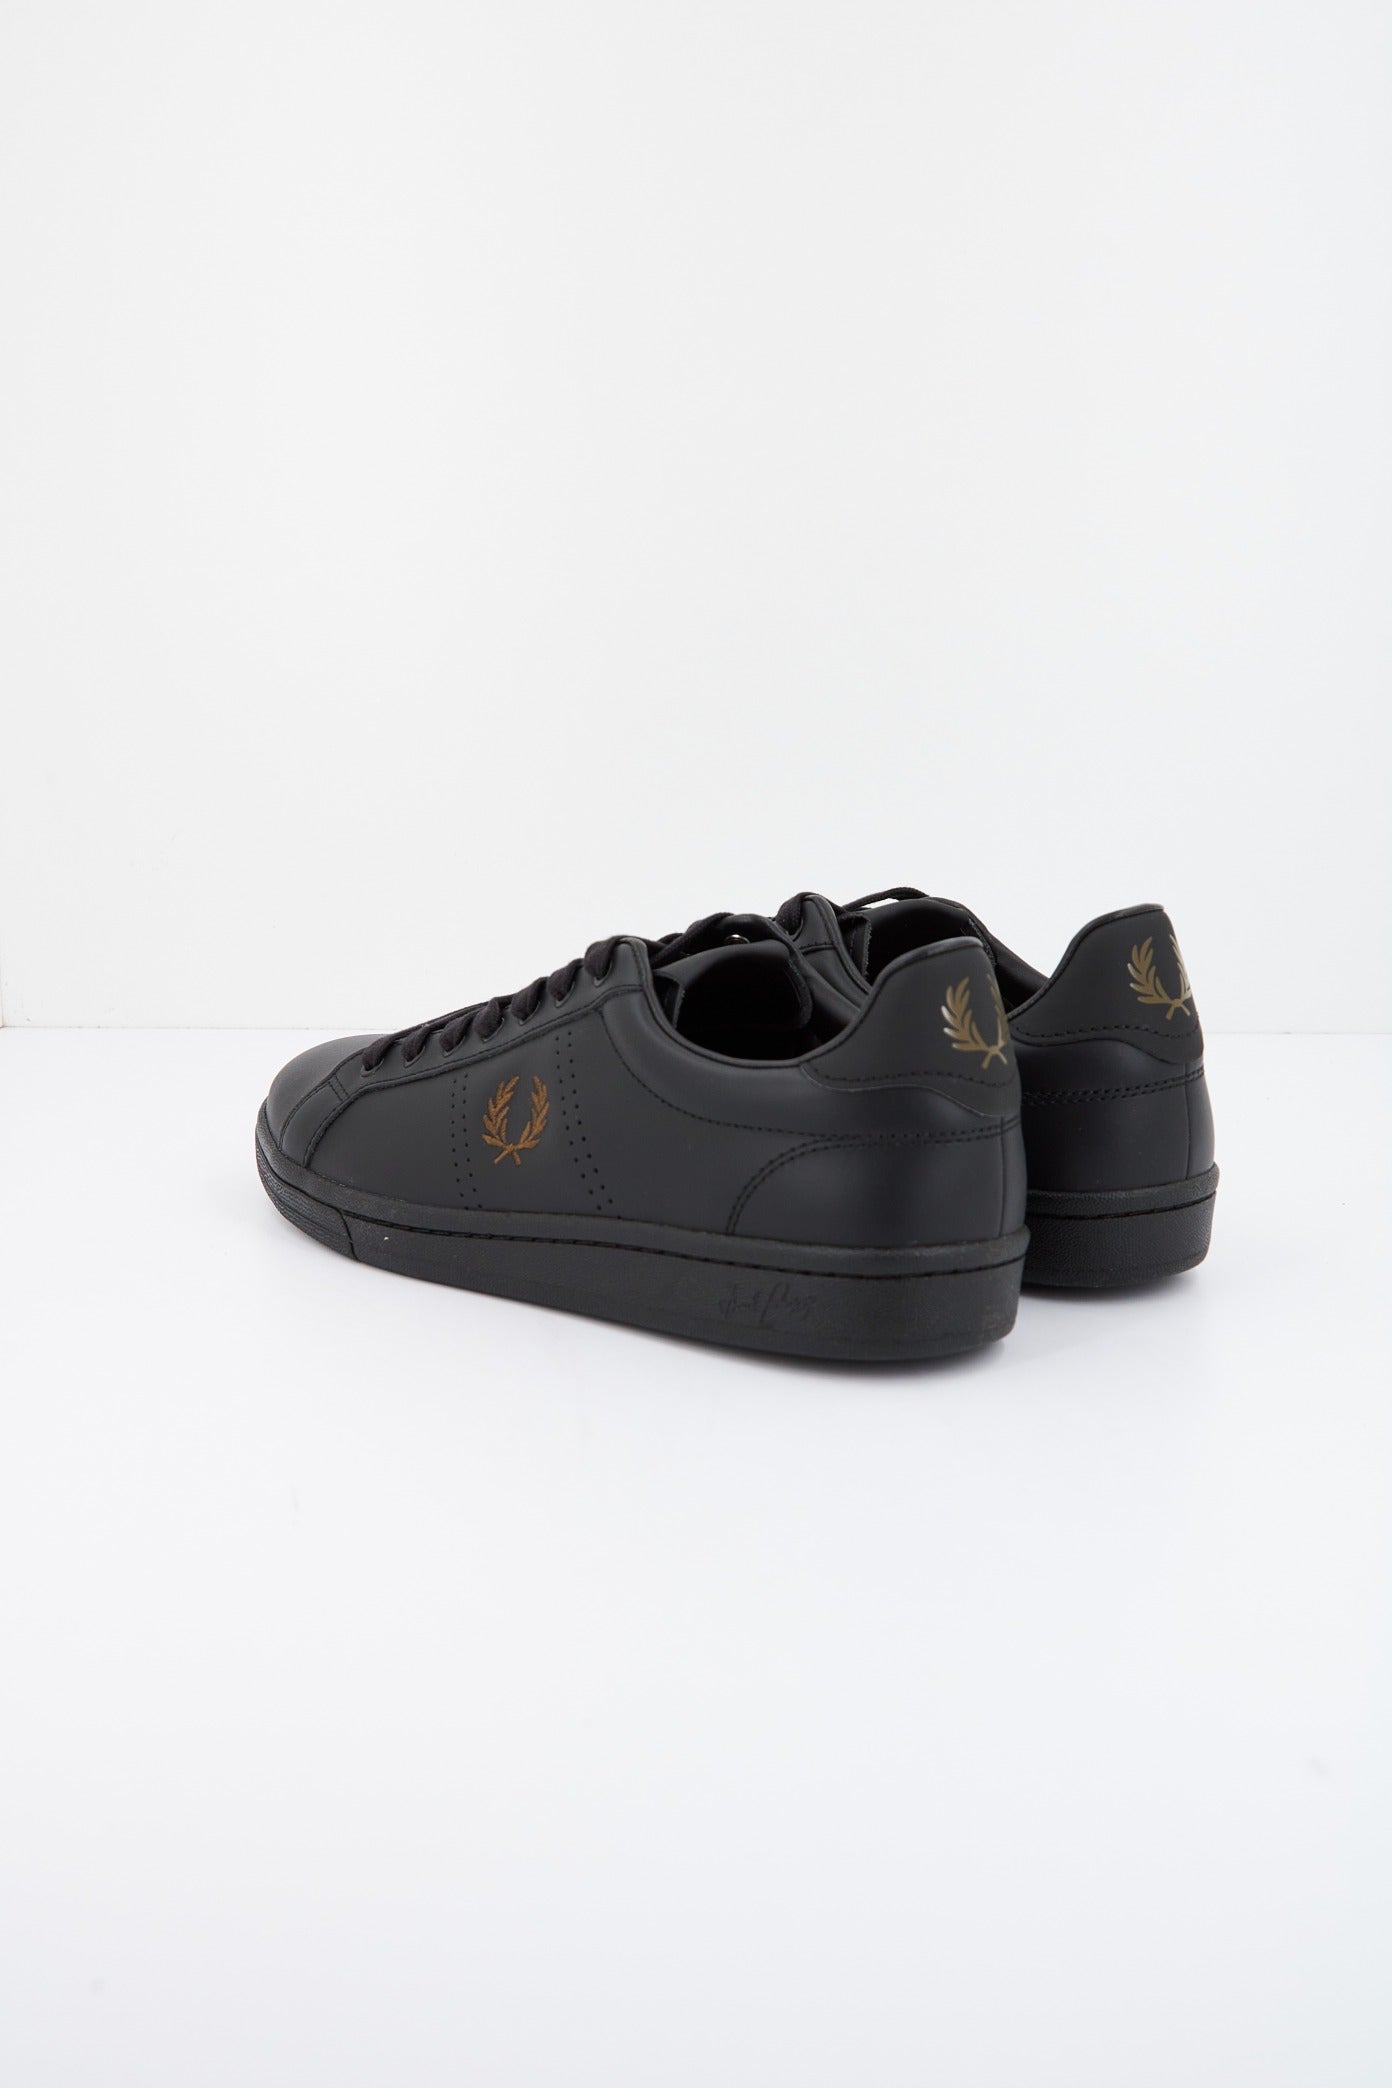 FRED PERRY LEATHER en color NEGRO  (3)